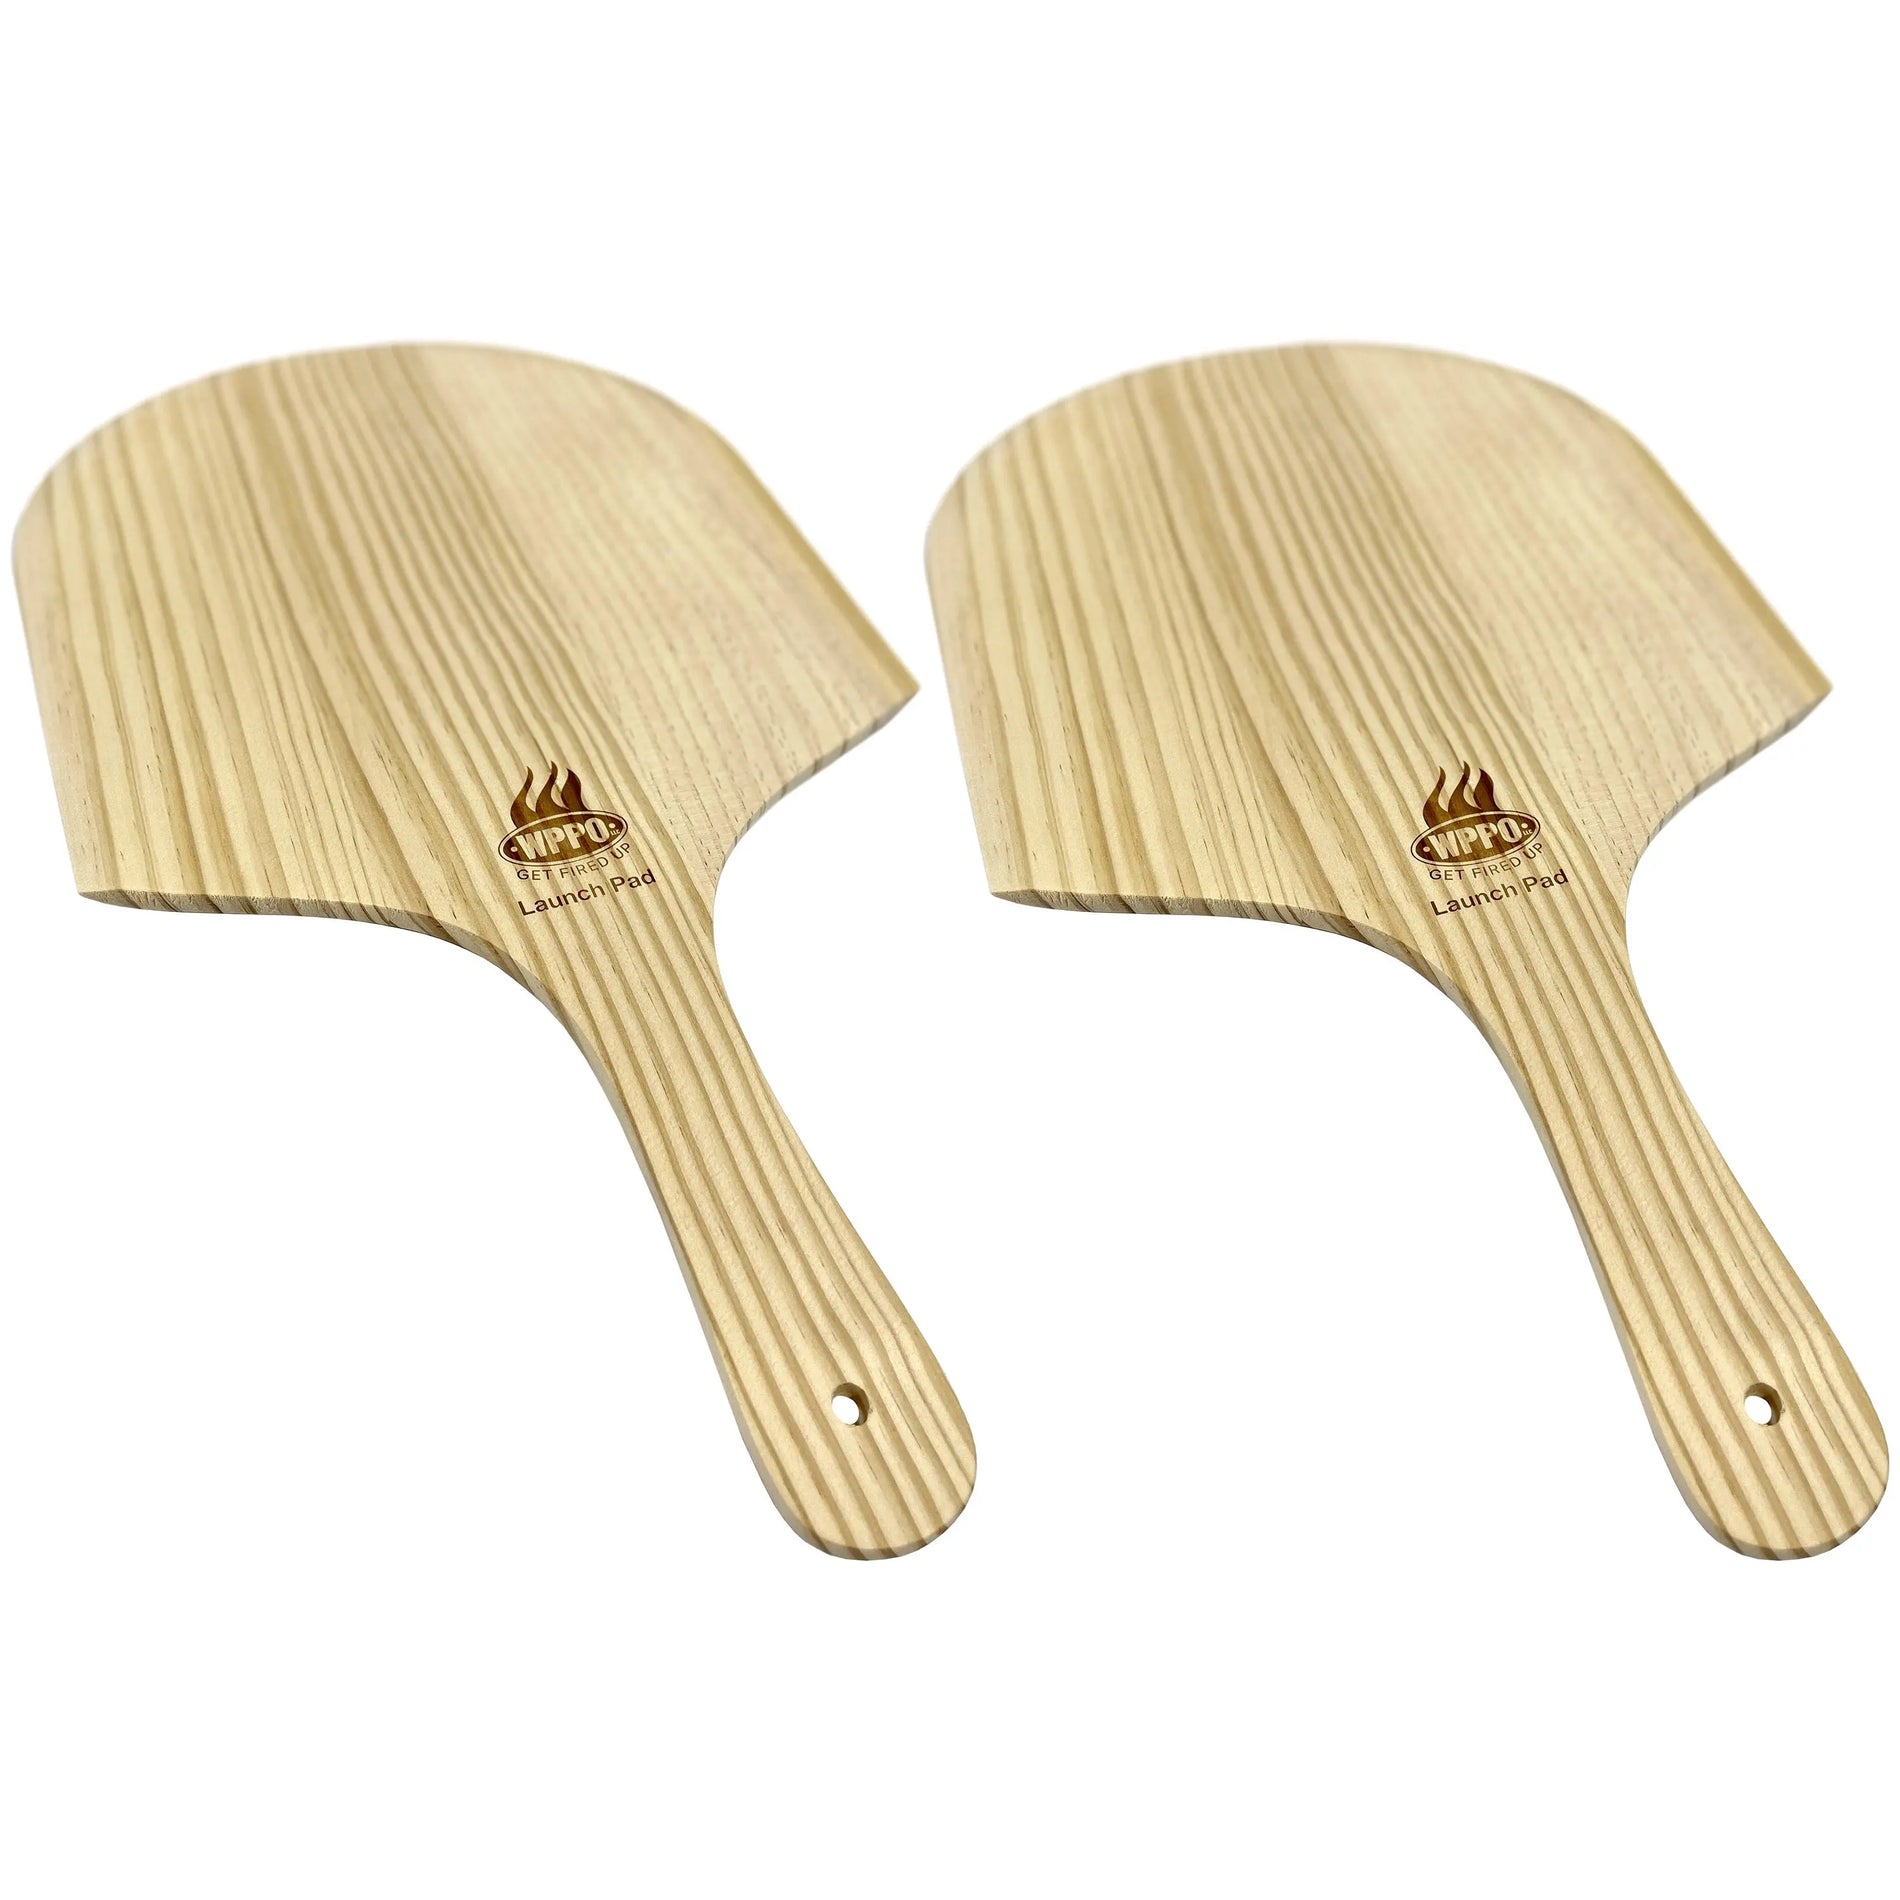 12 Square New Zealand Wooden Pizza Peel 2 pack - Land Supply Canada